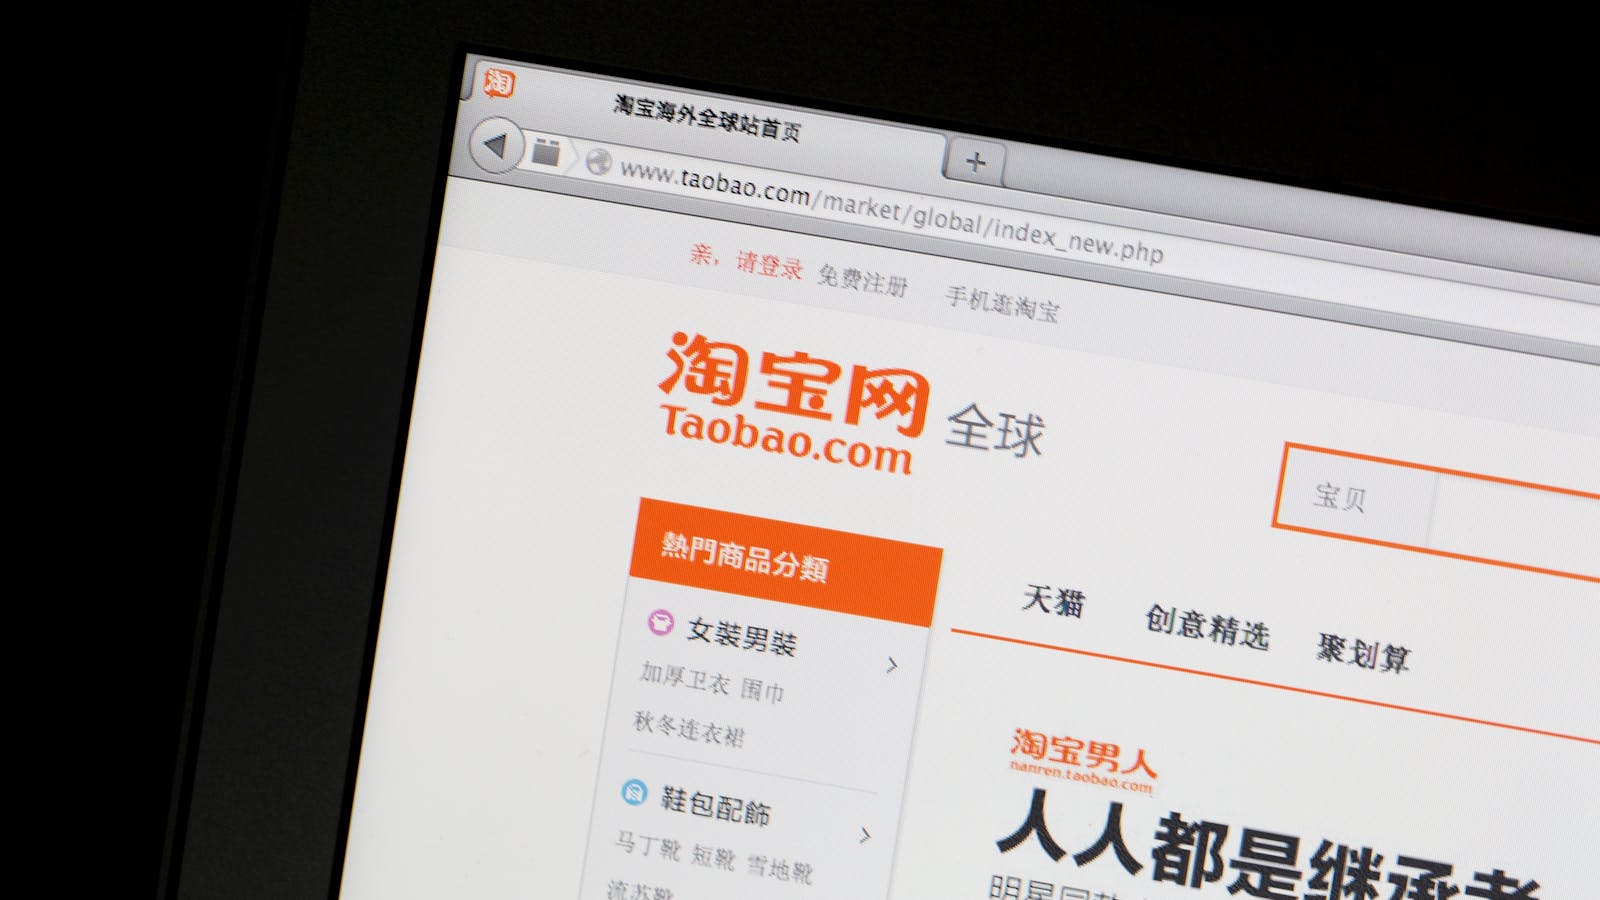 Taobao's web site. Photo by Bloomberg